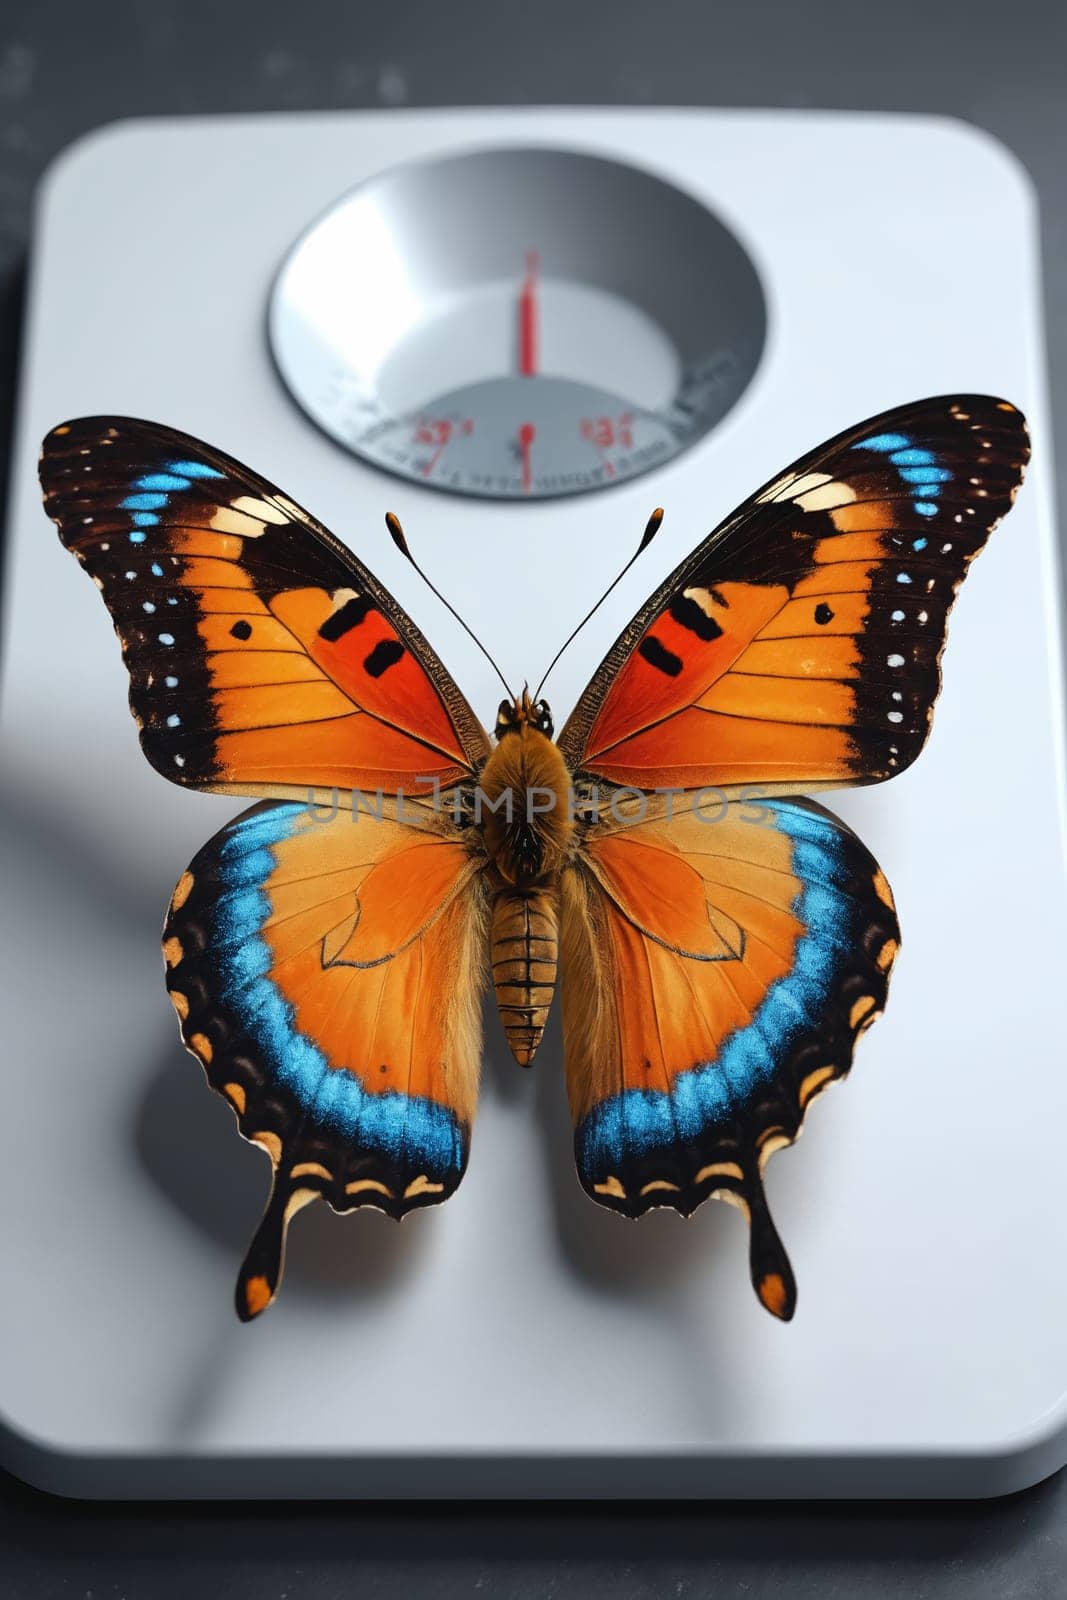 Nature Meets Technology: Orange Butterfly on a Precision Scale by Andre1ns